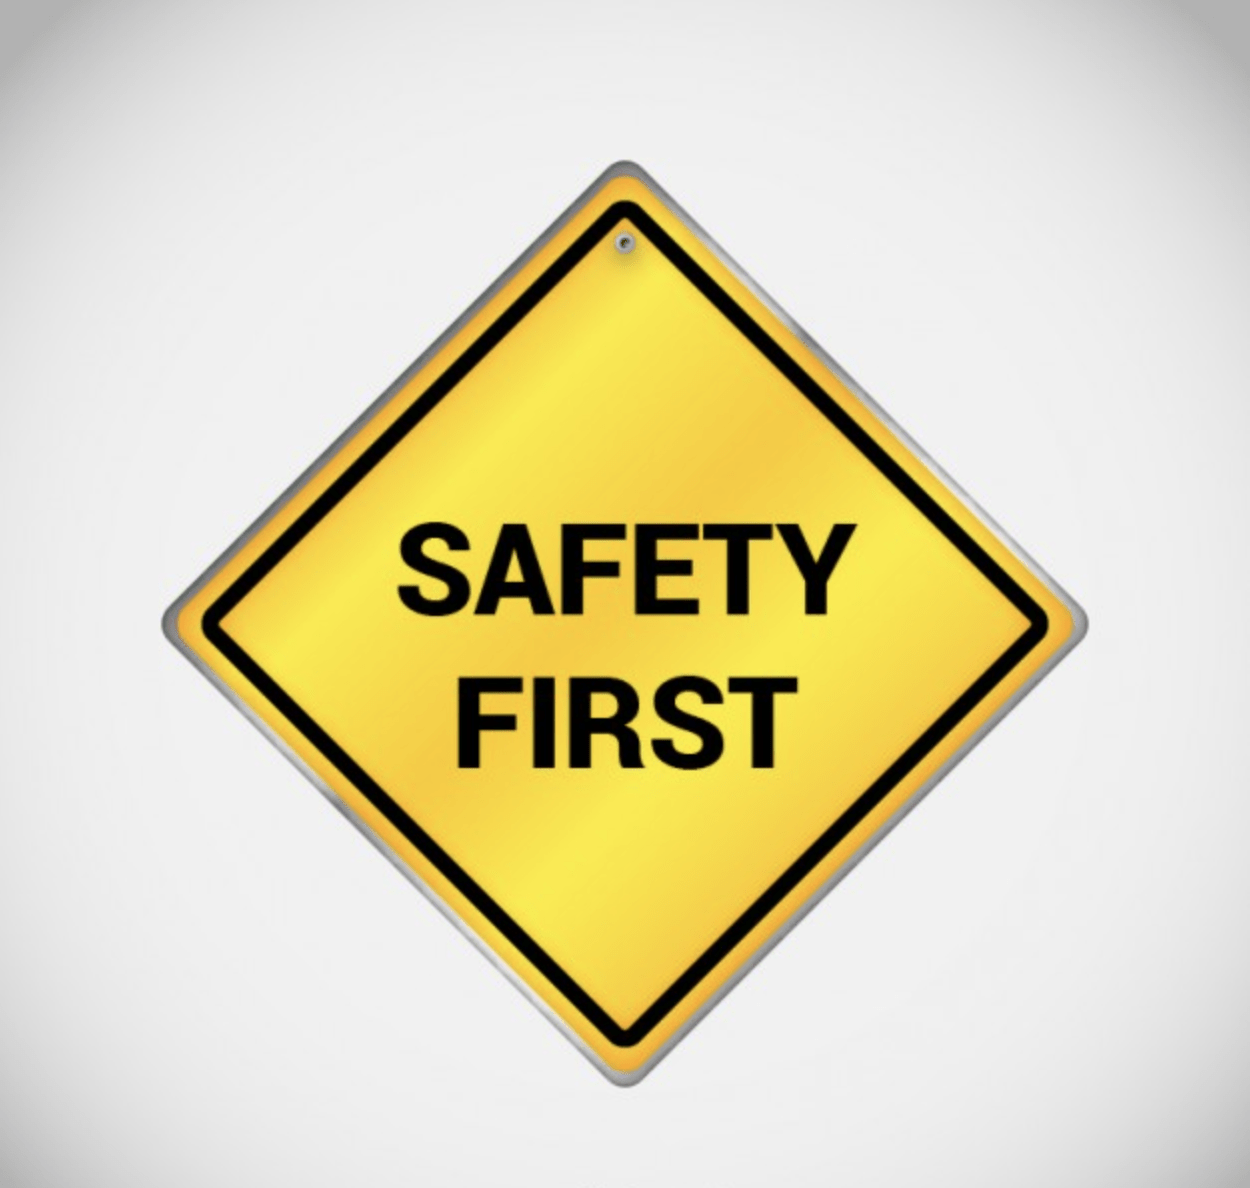 Animated safety training video showing the sign safety first